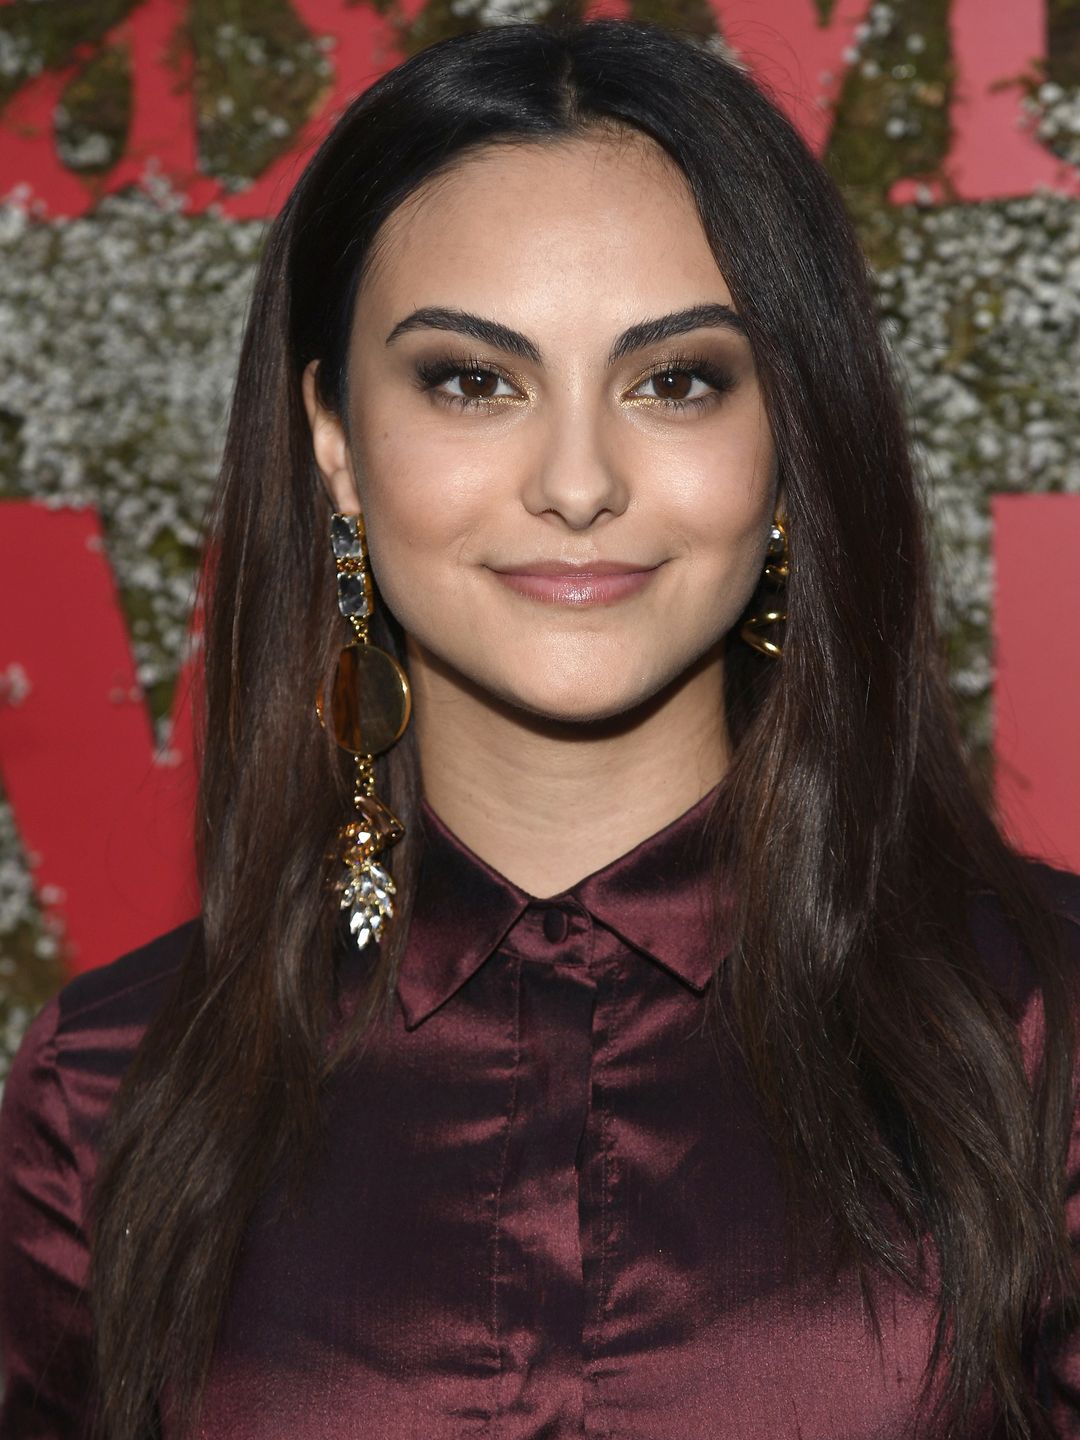 Camila Mendes who is her mother